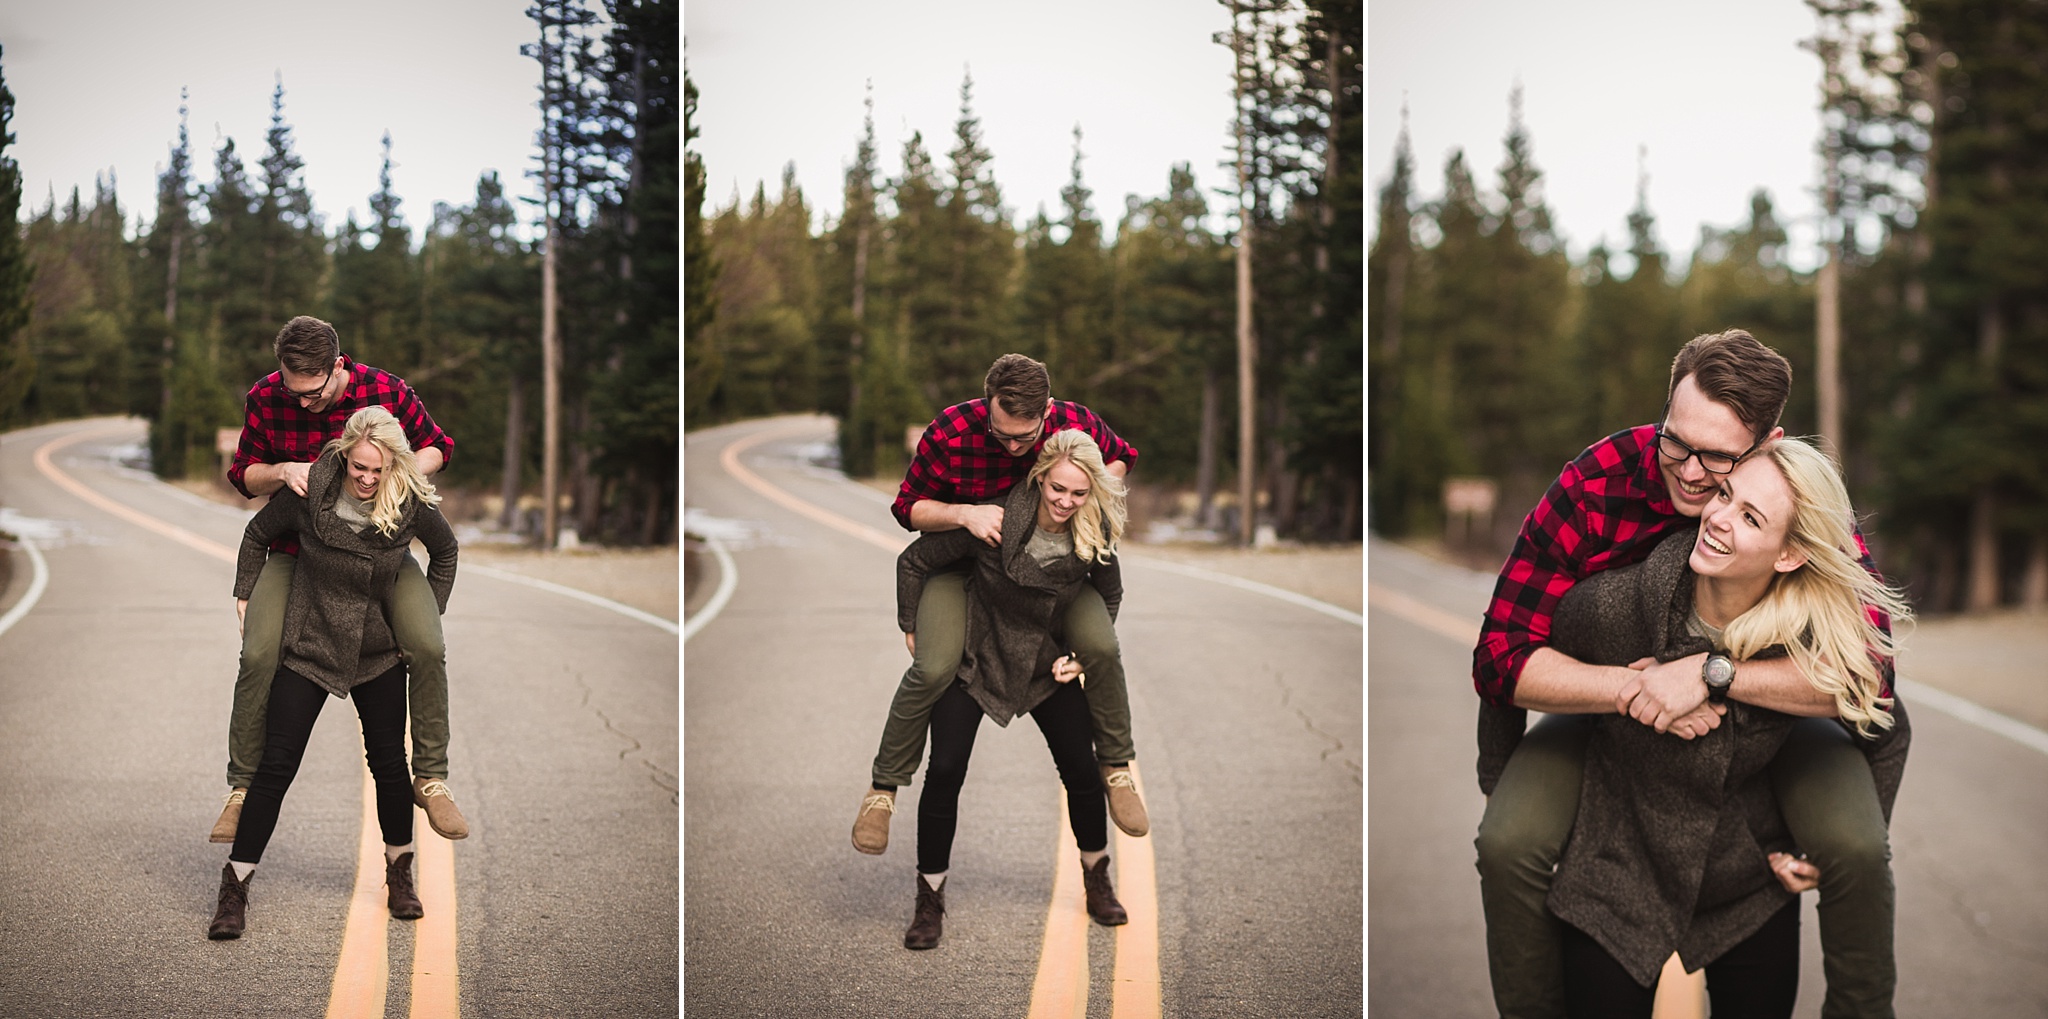 Woman giving her fiancé a piggyback ride during their mountain engagement session. Amy & Jonathan’s Brainard Lake Winter Engagement Session by Colorado Engagement Photographer, Jennifer Garza. Colorado Engagement Photographer, Colorado Engagement Photography, Brainard Lake Engagement Session, Brainard Lake Engagement Photos, Mountain Engagement Session, Colorado Winter Engagement Photos, Winter Engagement Photography, Mountain Engagement Photographer, Colorado Wedding, Colorado Bride, MagMod